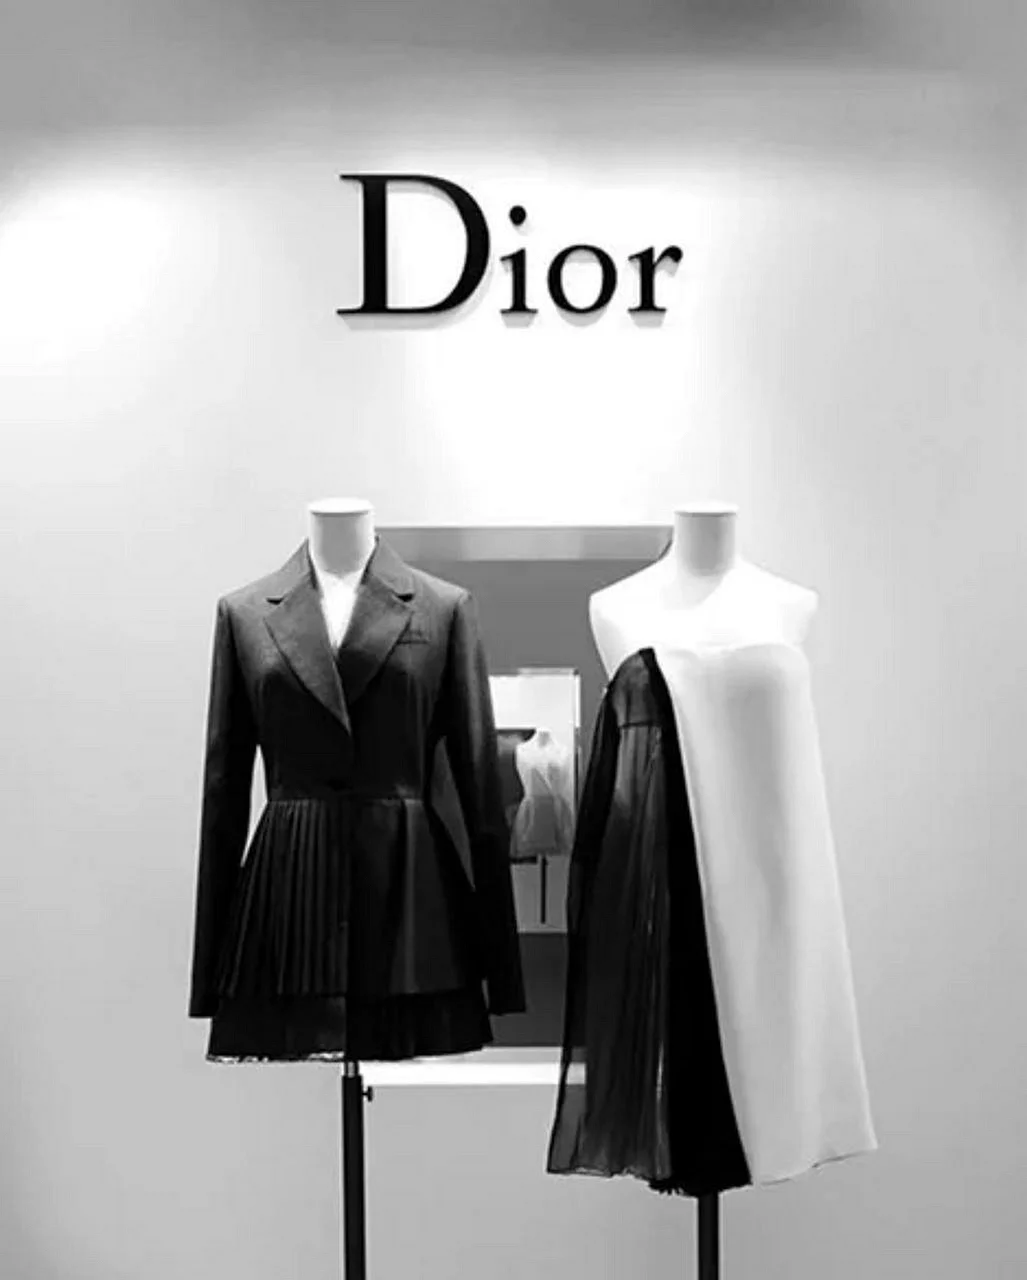 Dior Design Wallpaper For iPhone